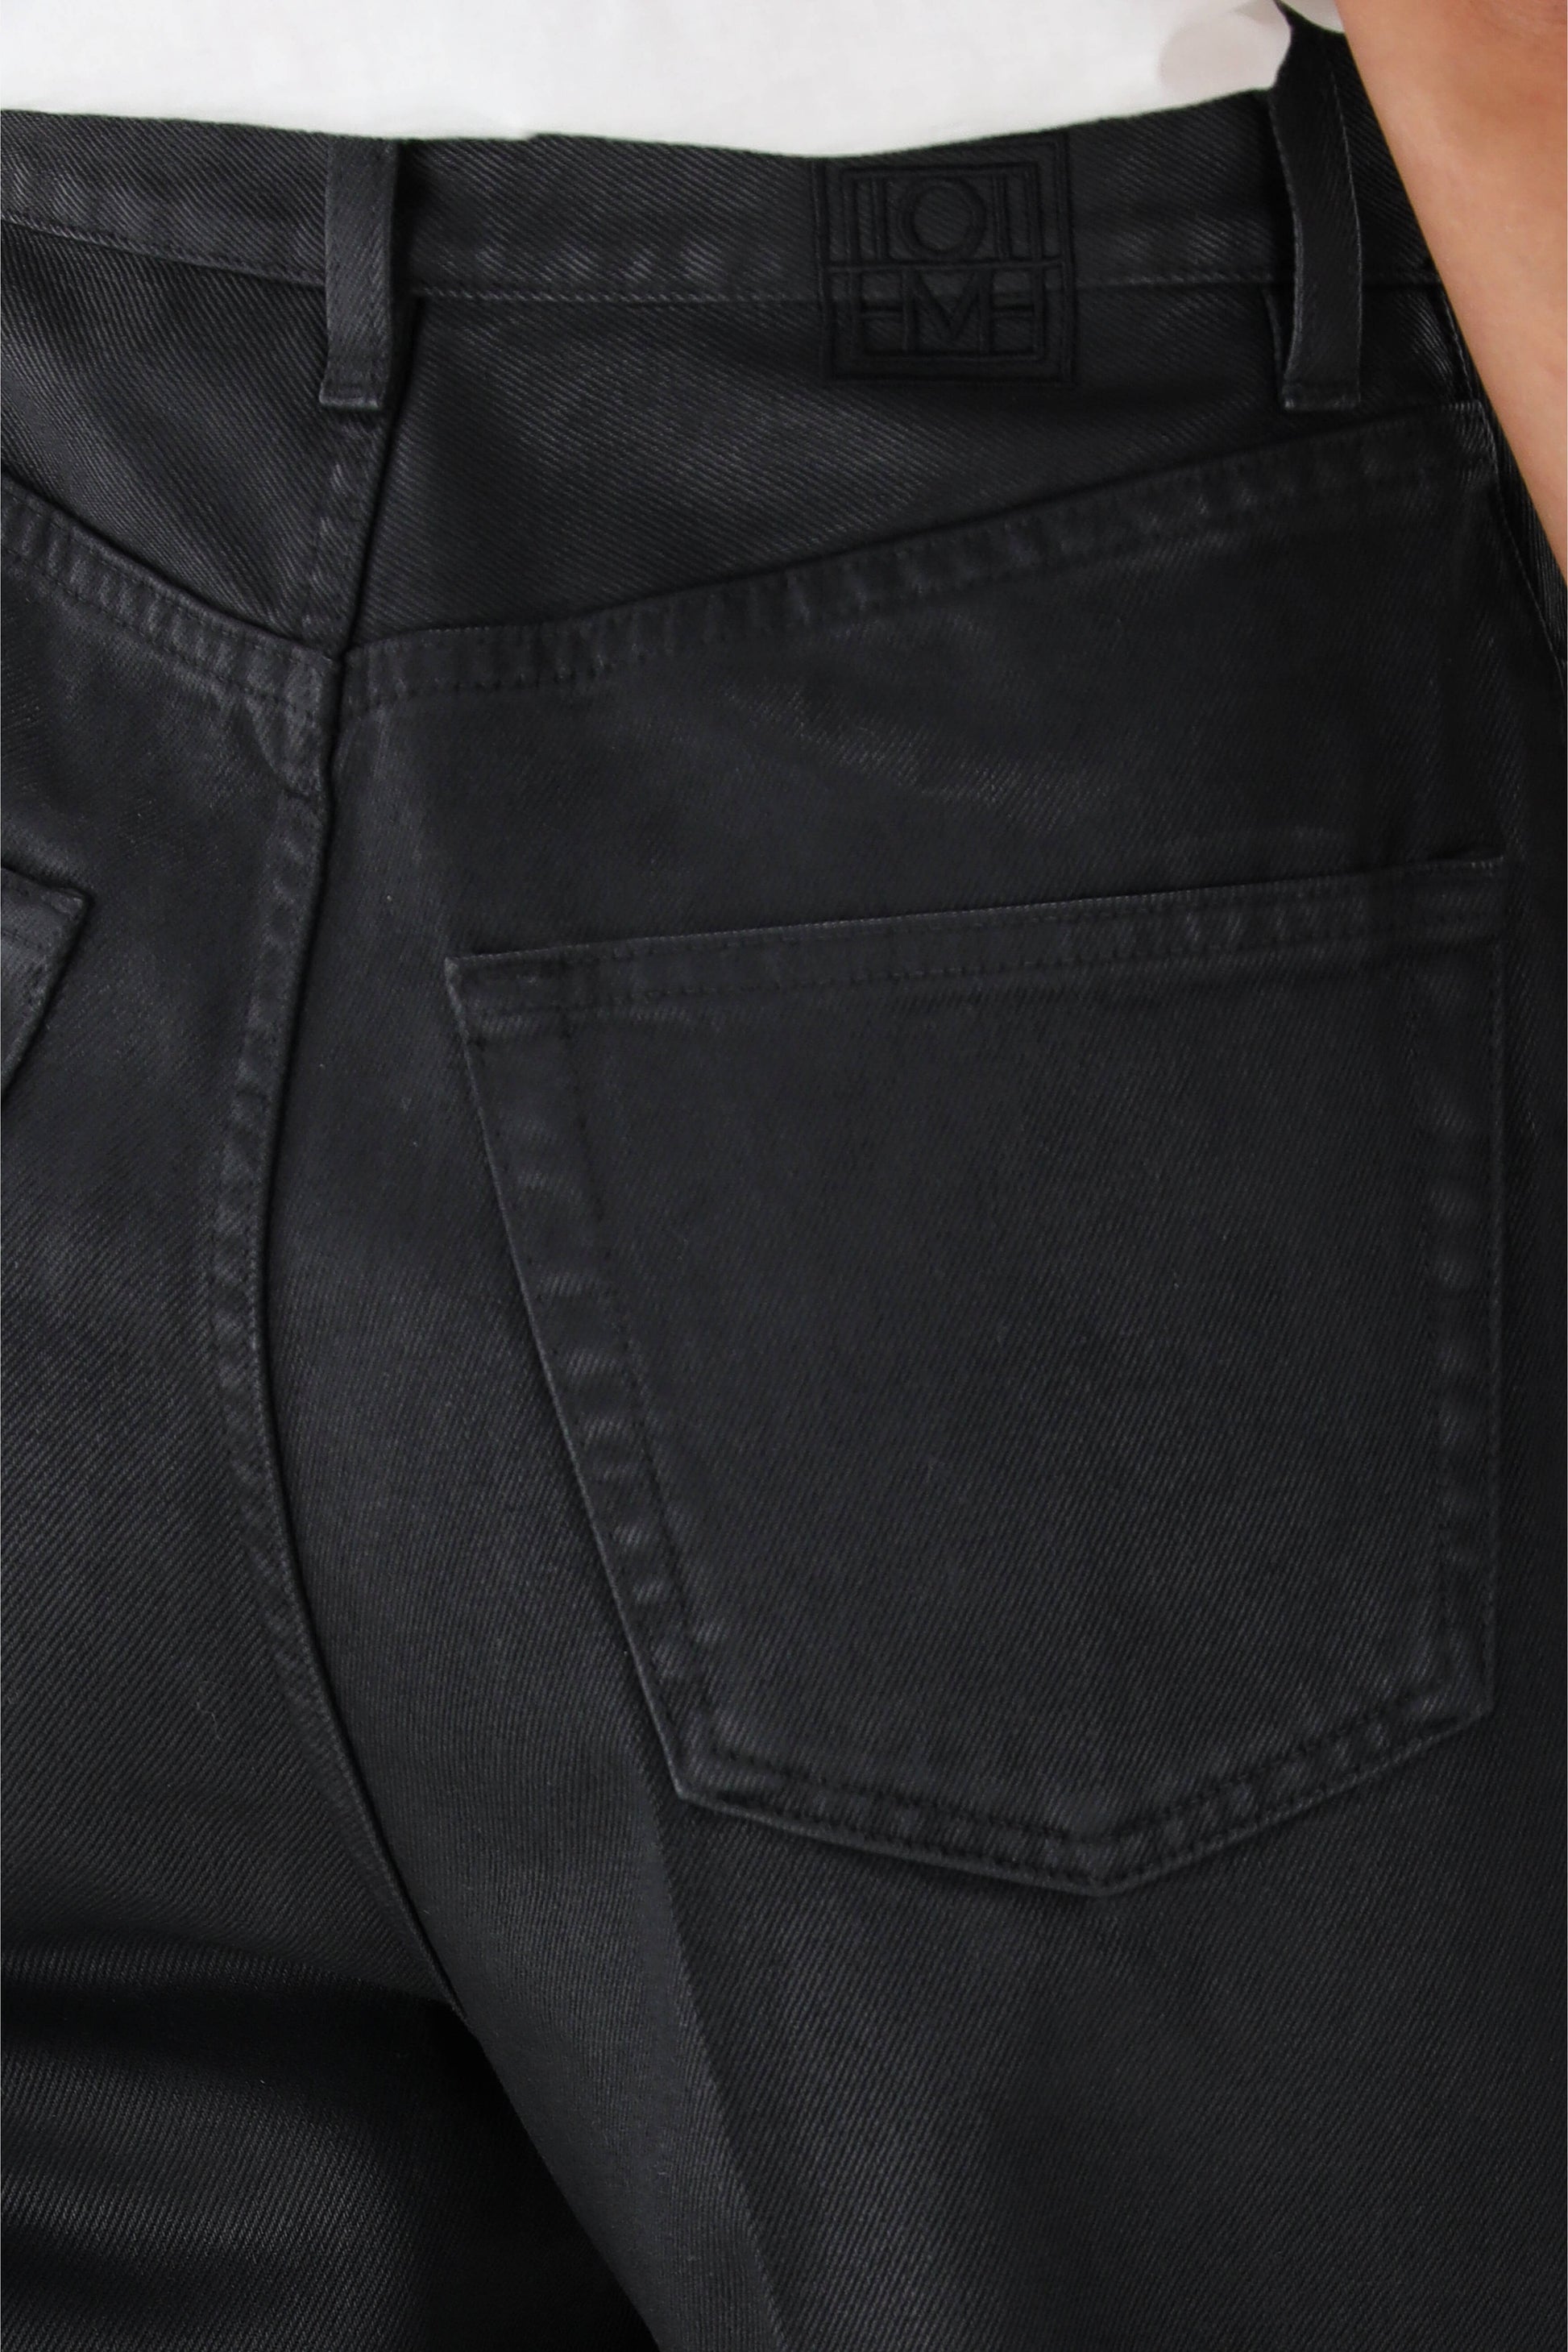 Jeans Tapered in Coated BlackToteme - Anita Hass